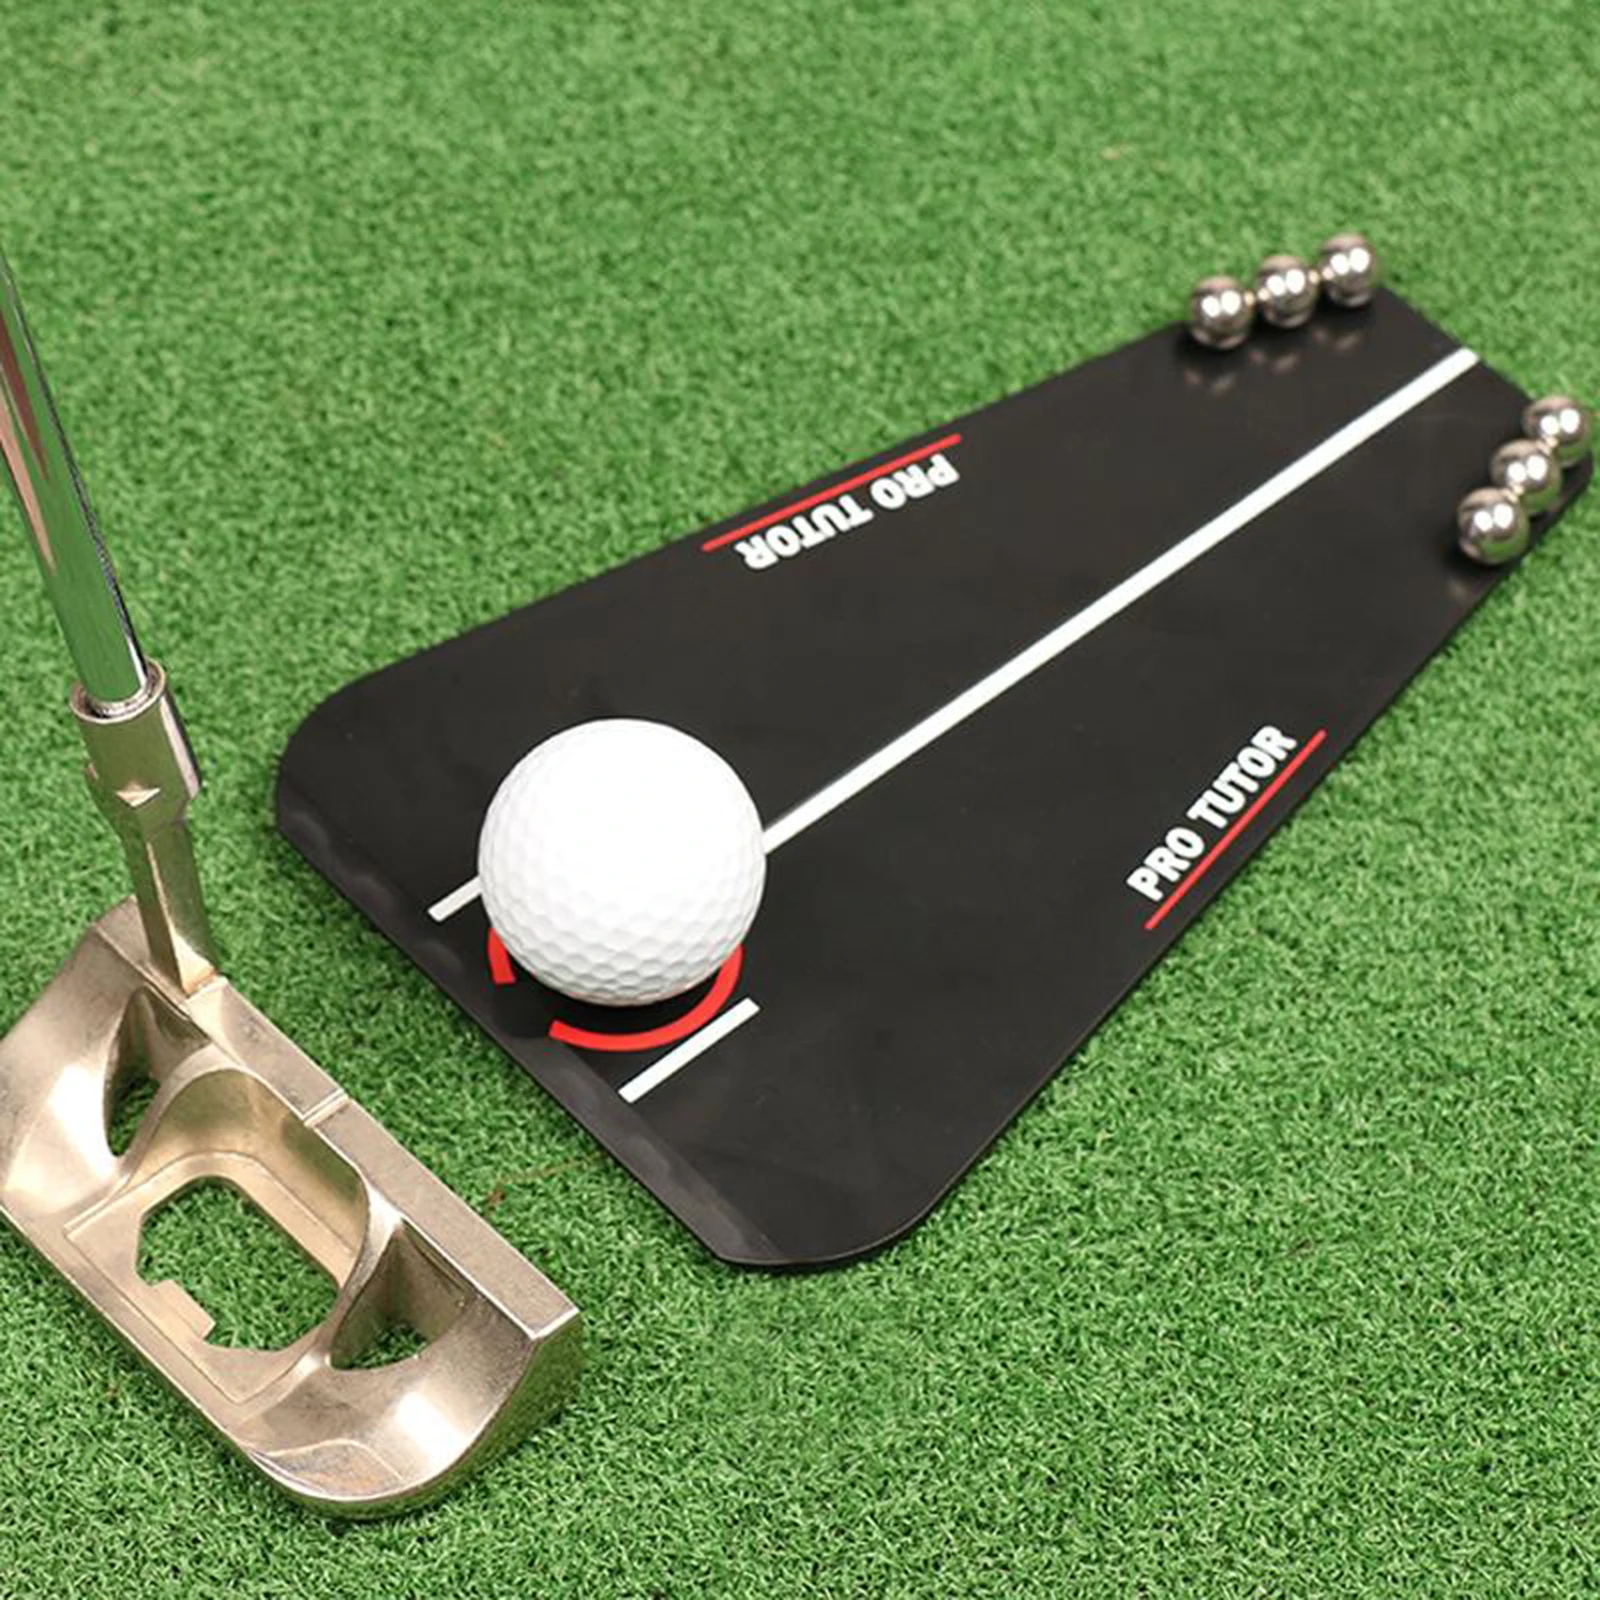 Portable Golf Putting Training Aid Alignment Swing Trainer Golf Swing Straight Practice Eye Line Golf Accessories